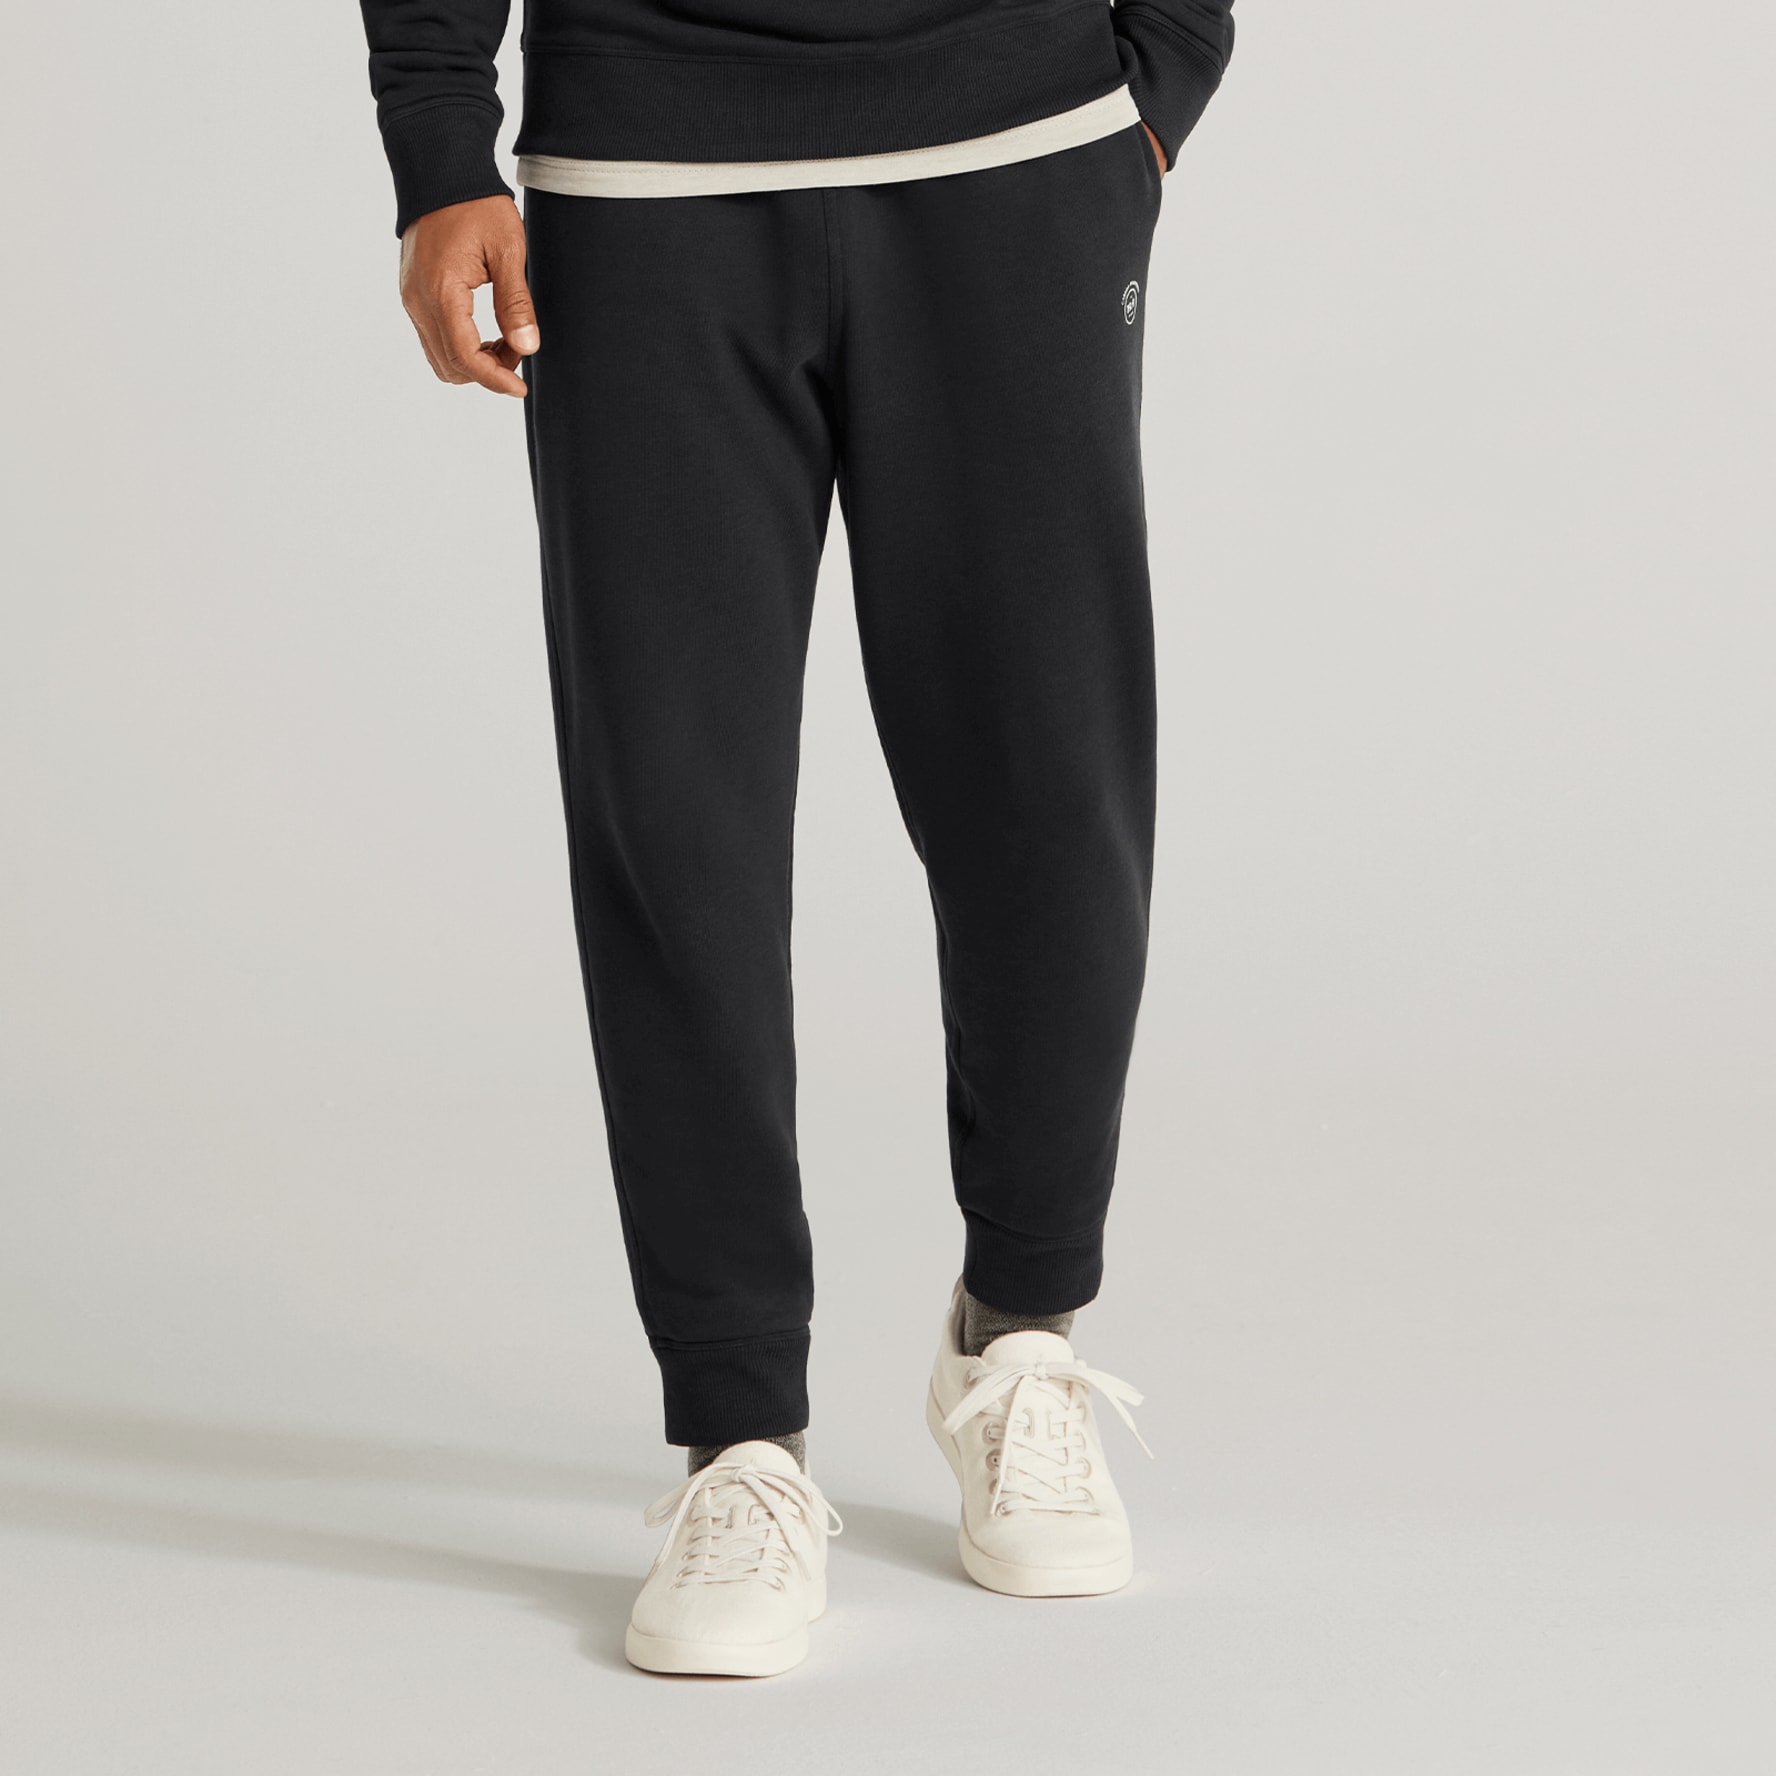 10 Sustainable Sweatpants That Meet the Highest Ethical Standards